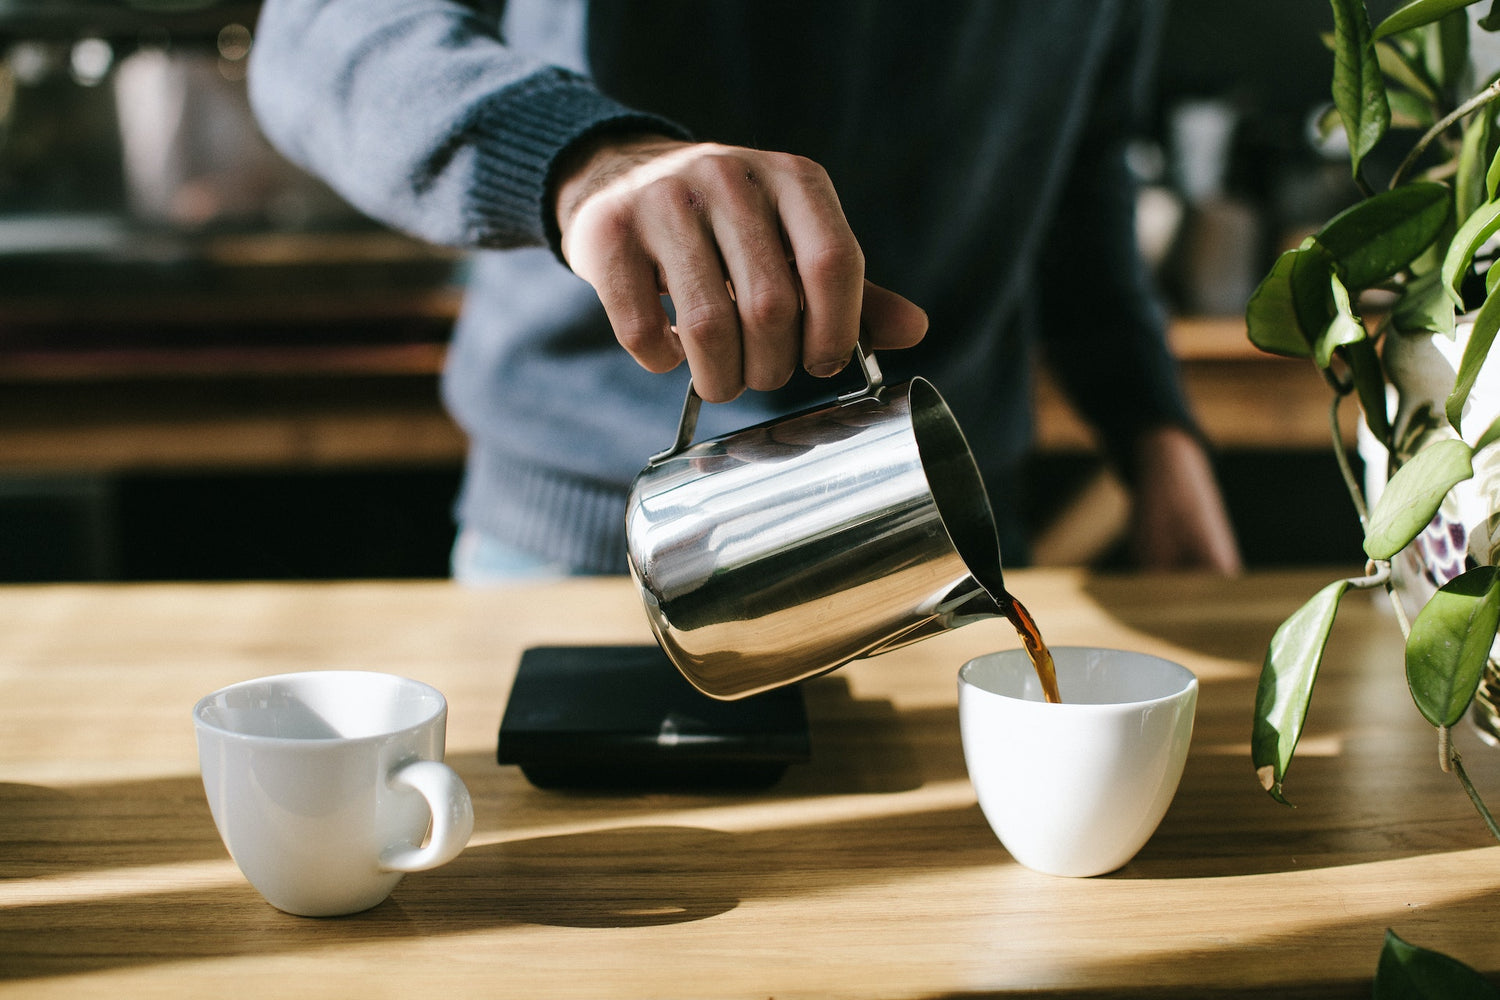 A man is filling a cup with coffee and making it ready to drink